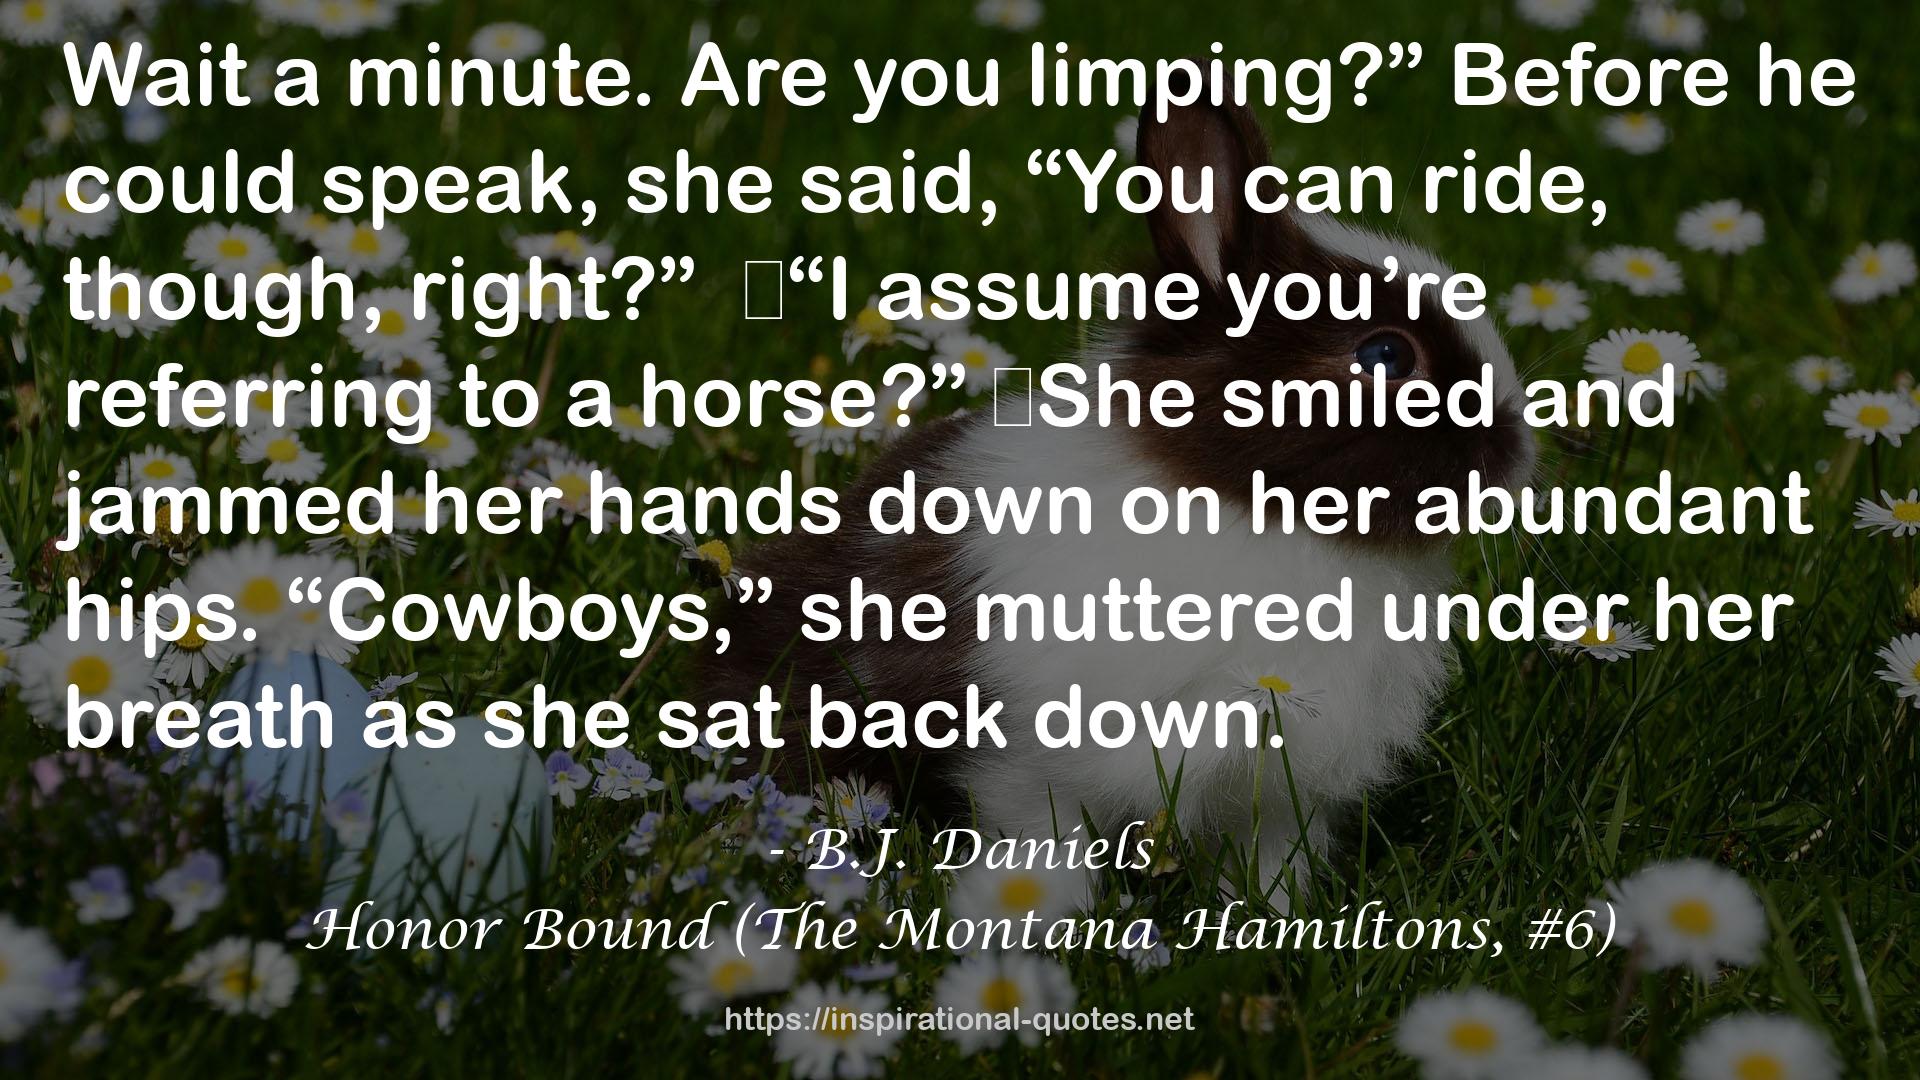 Honor Bound (The Montana Hamiltons, #6) QUOTES